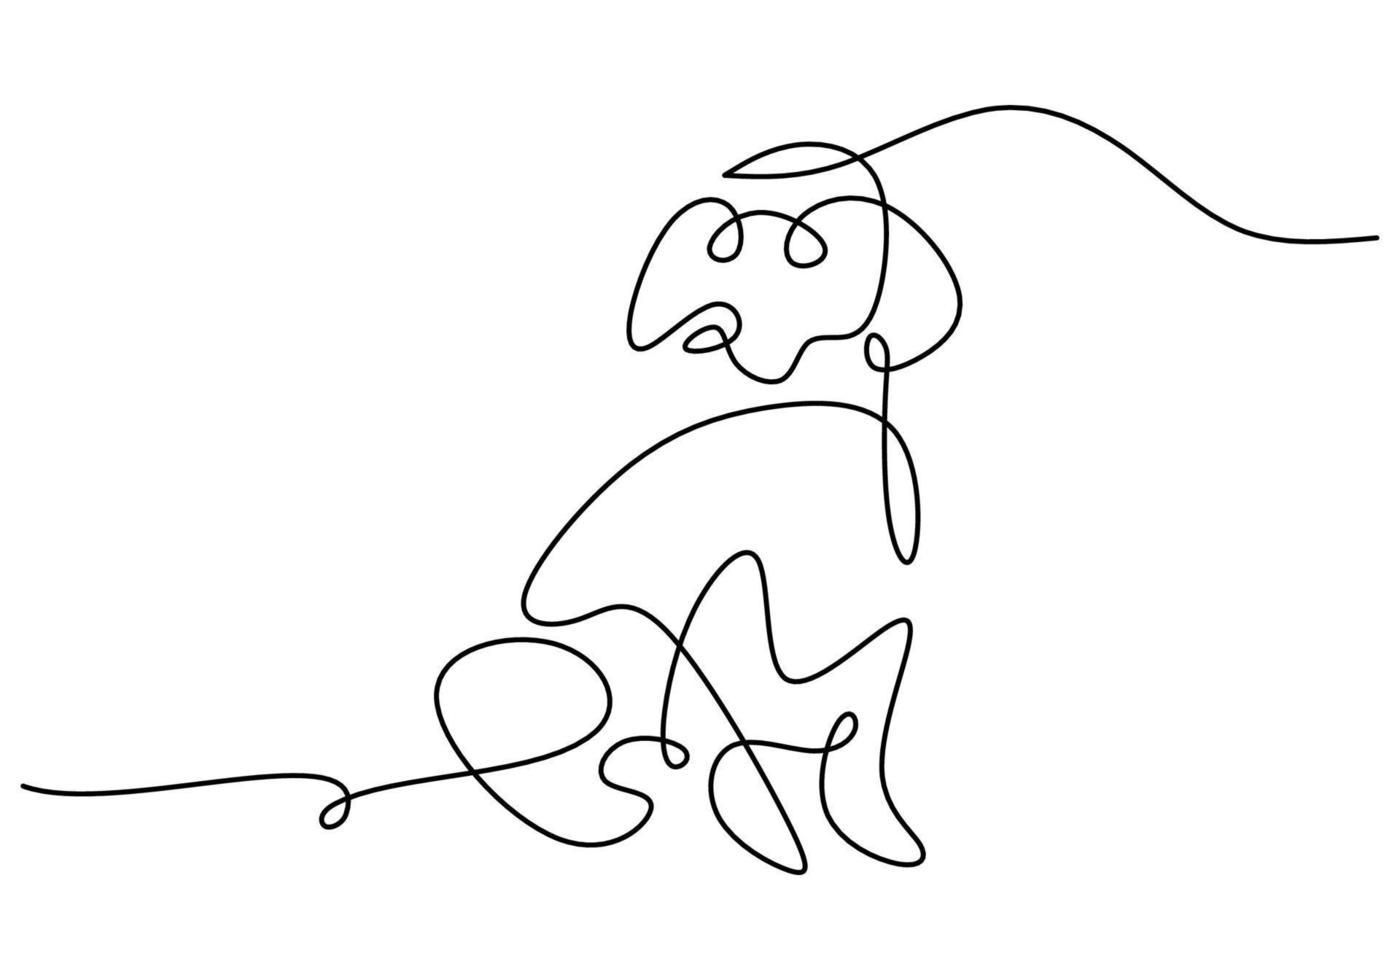 Hand drawn one single continuous line of dog on white background. vector